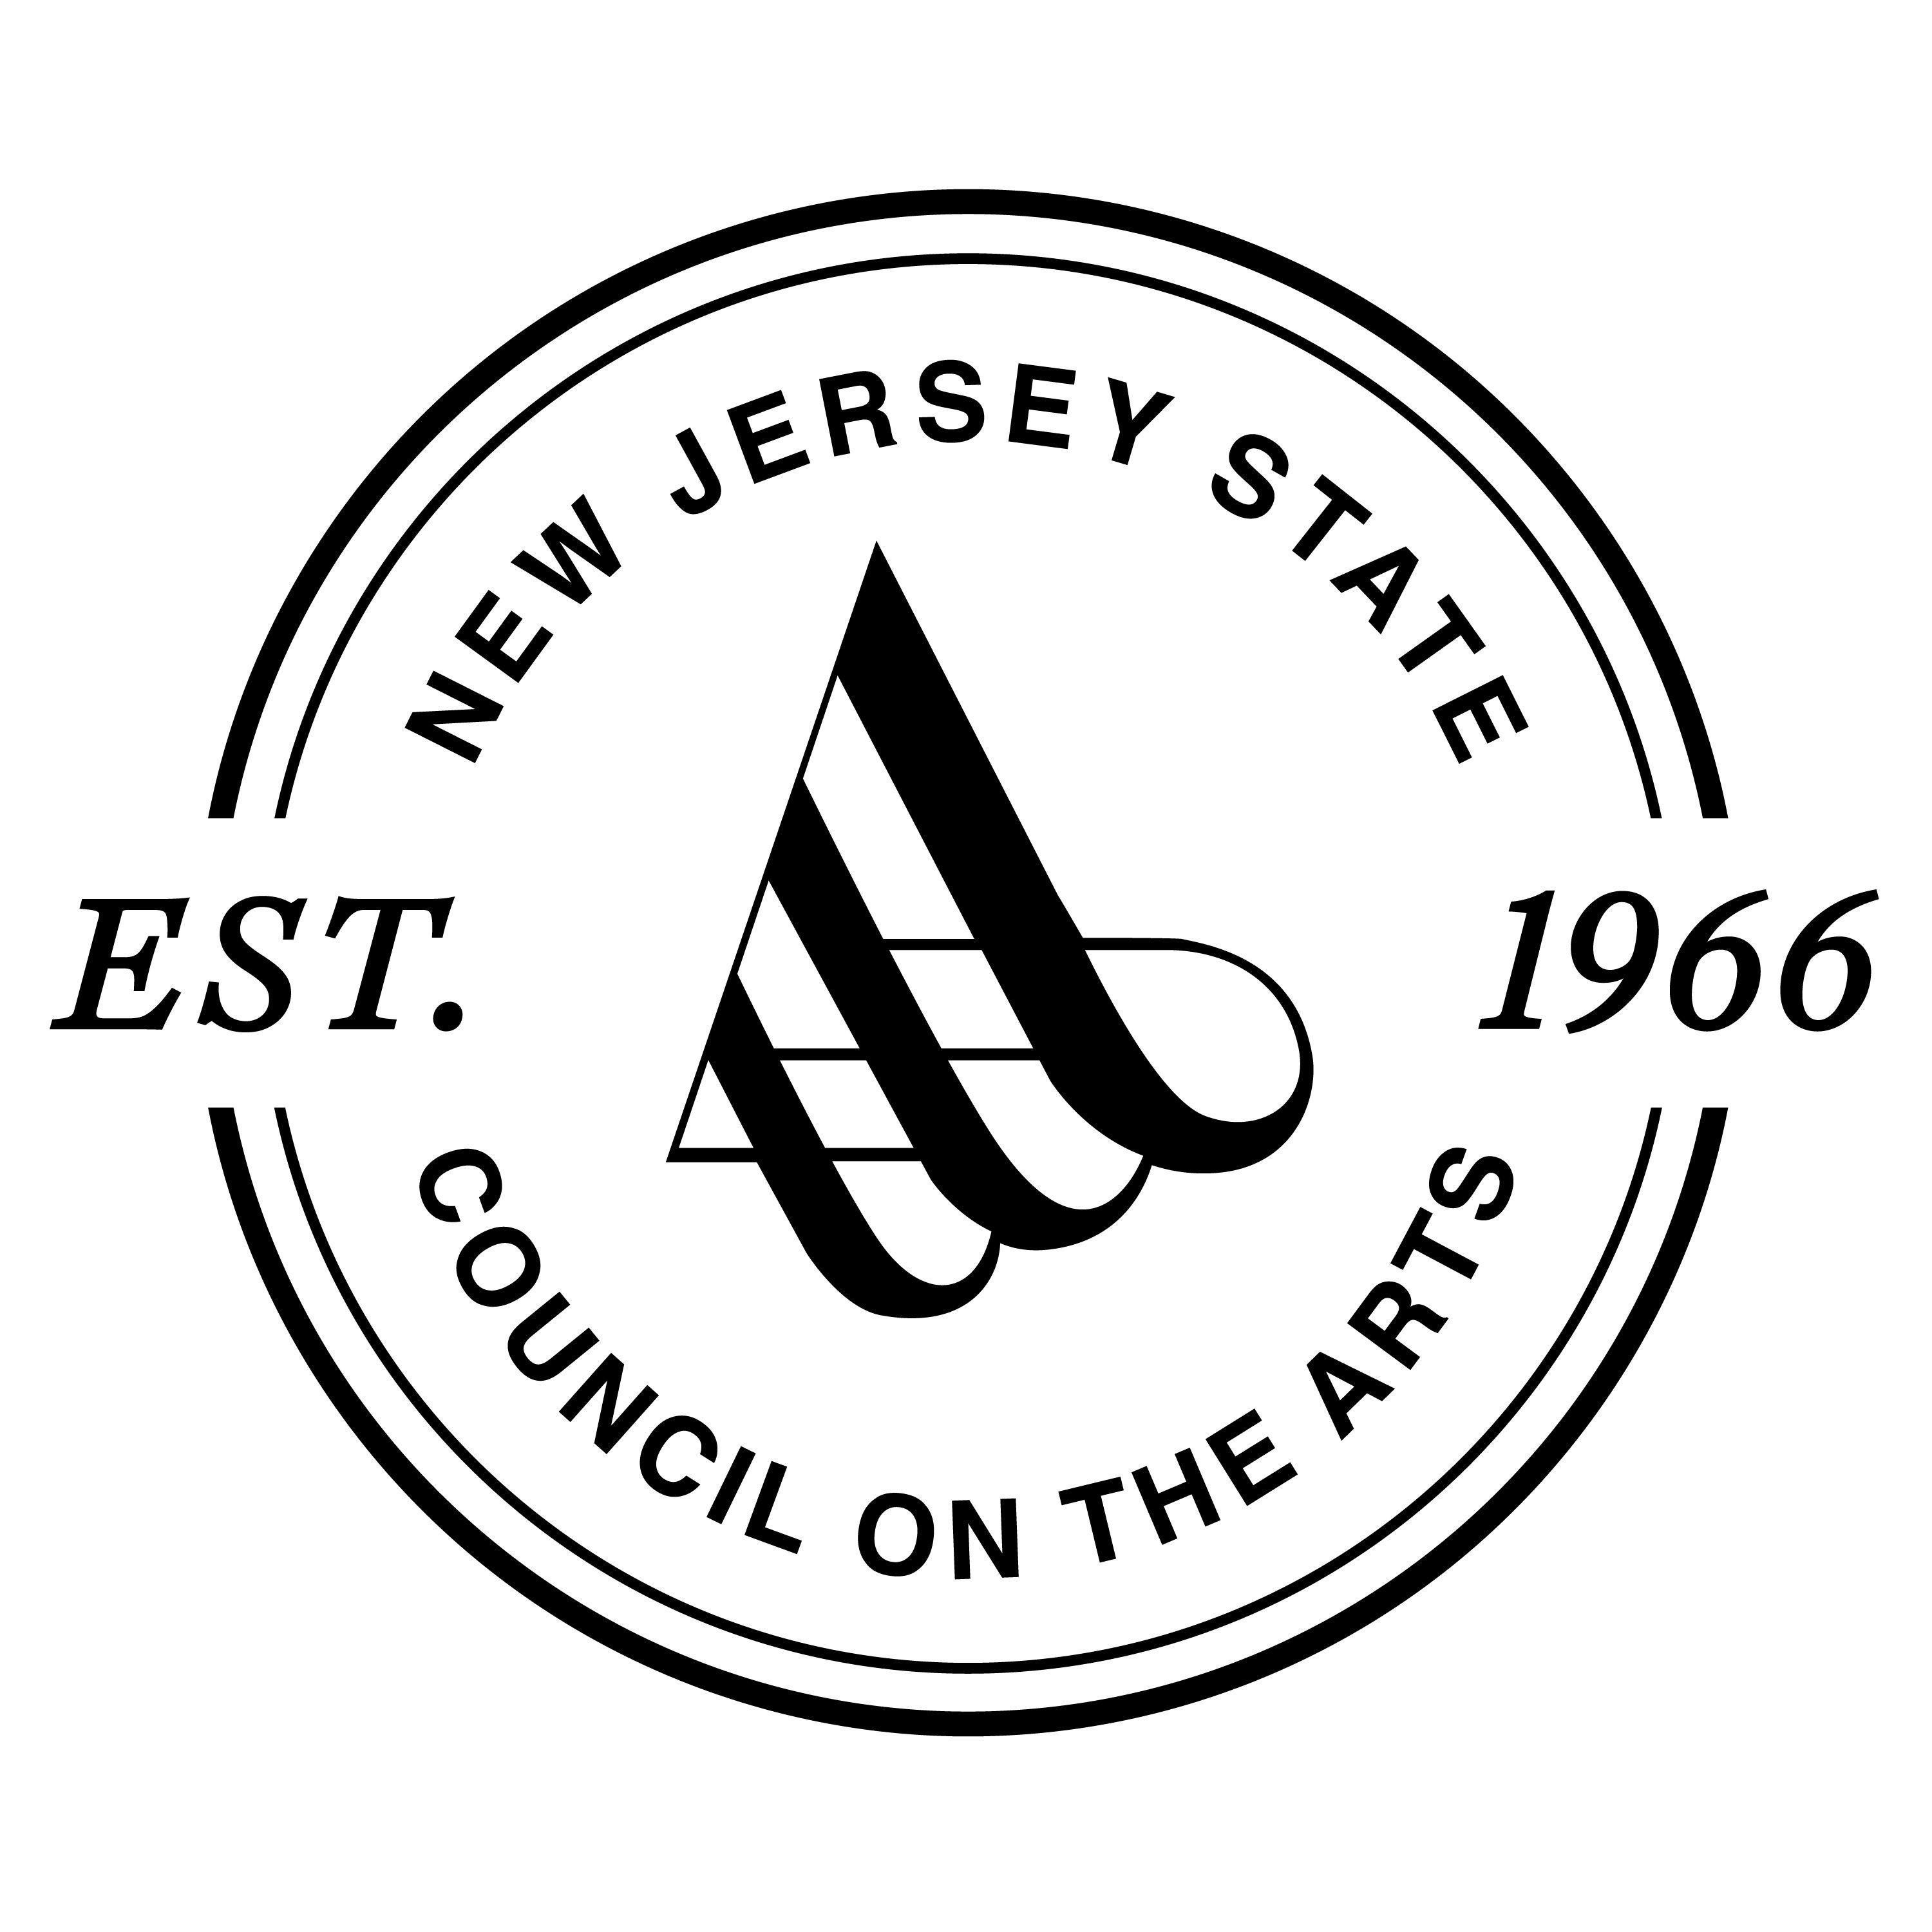 Sta Logo - New Jersey State Council on the Arts